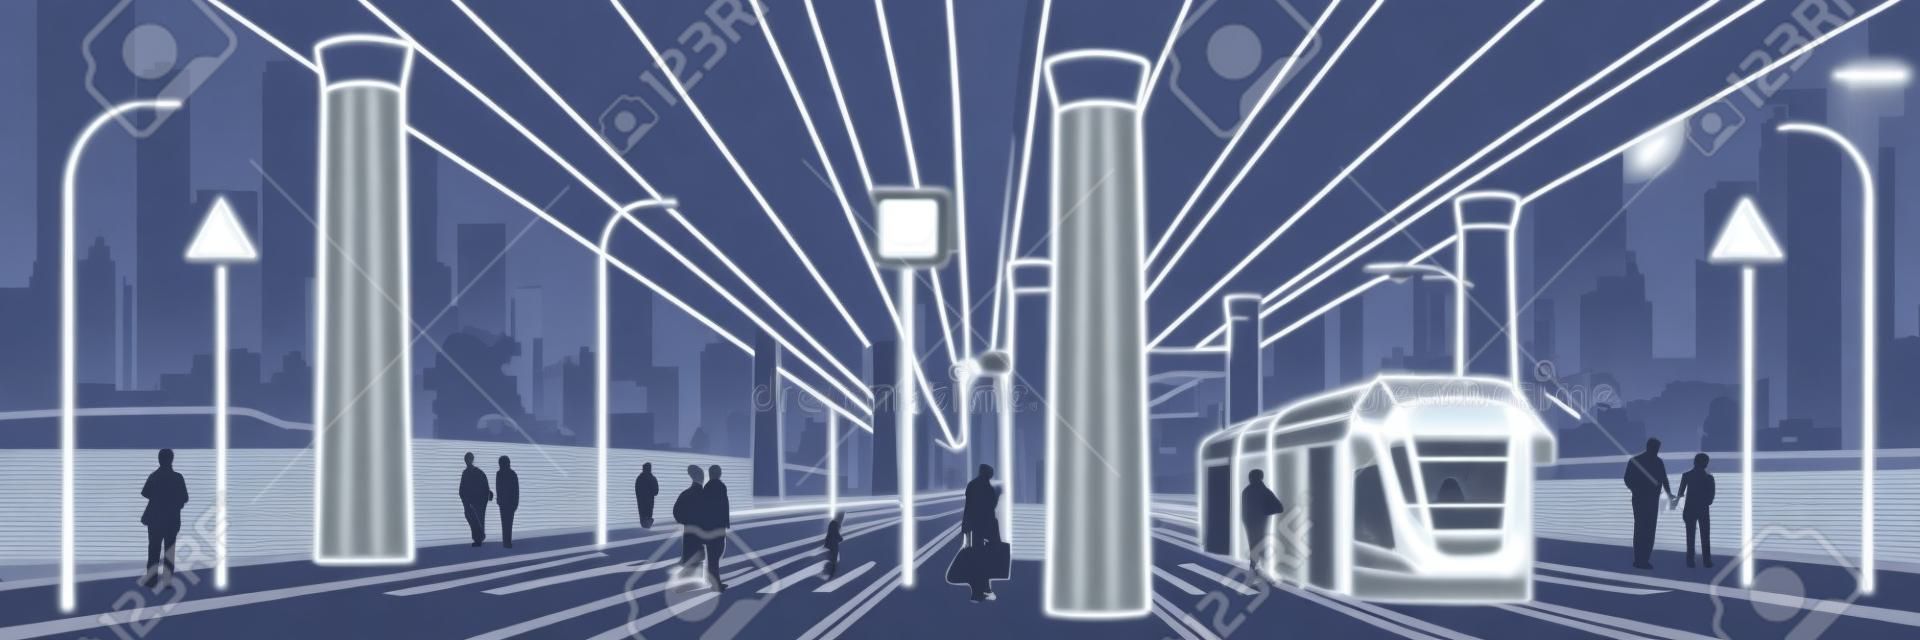 City scene. Urban environment. Automobile bridge, overpass. Tram rides. People walking at street. Night city on background. Electric transport. Outline vector infrastructure illustration. White lines